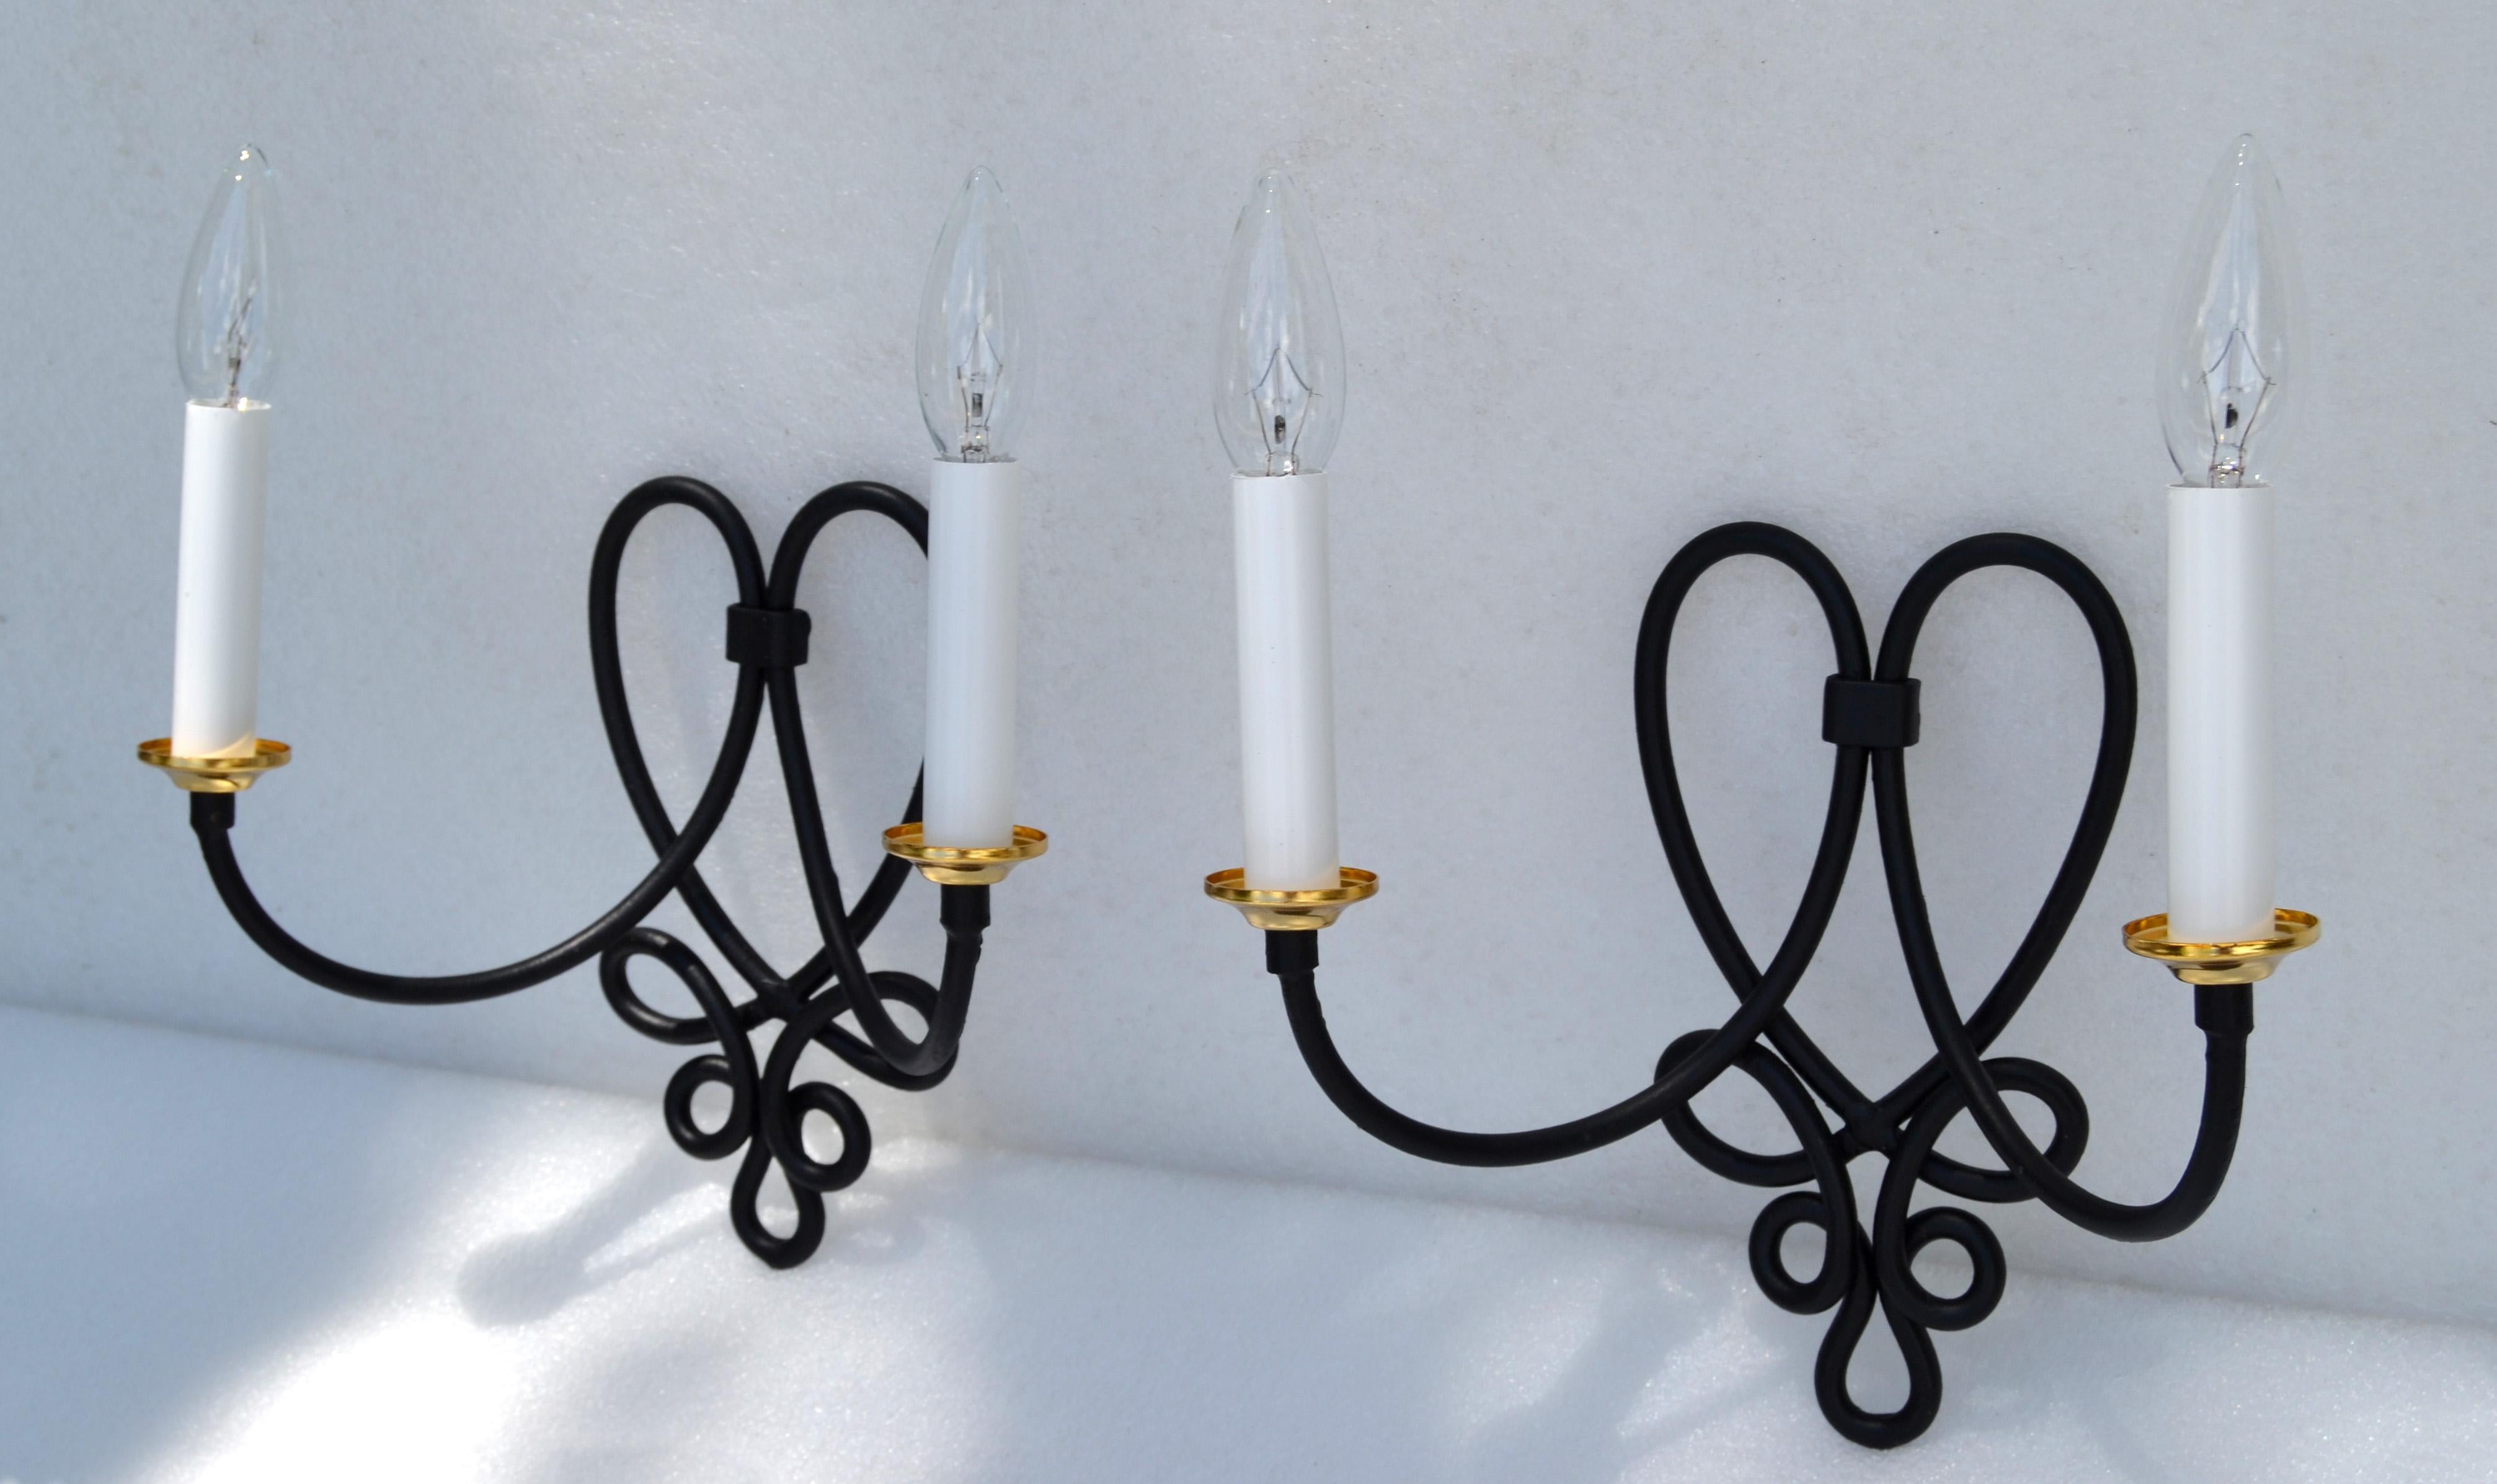 Pair, Rene Prou French 2 Lights Wrought Iron & Brass Wall Sconces Black Finish For Sale 4